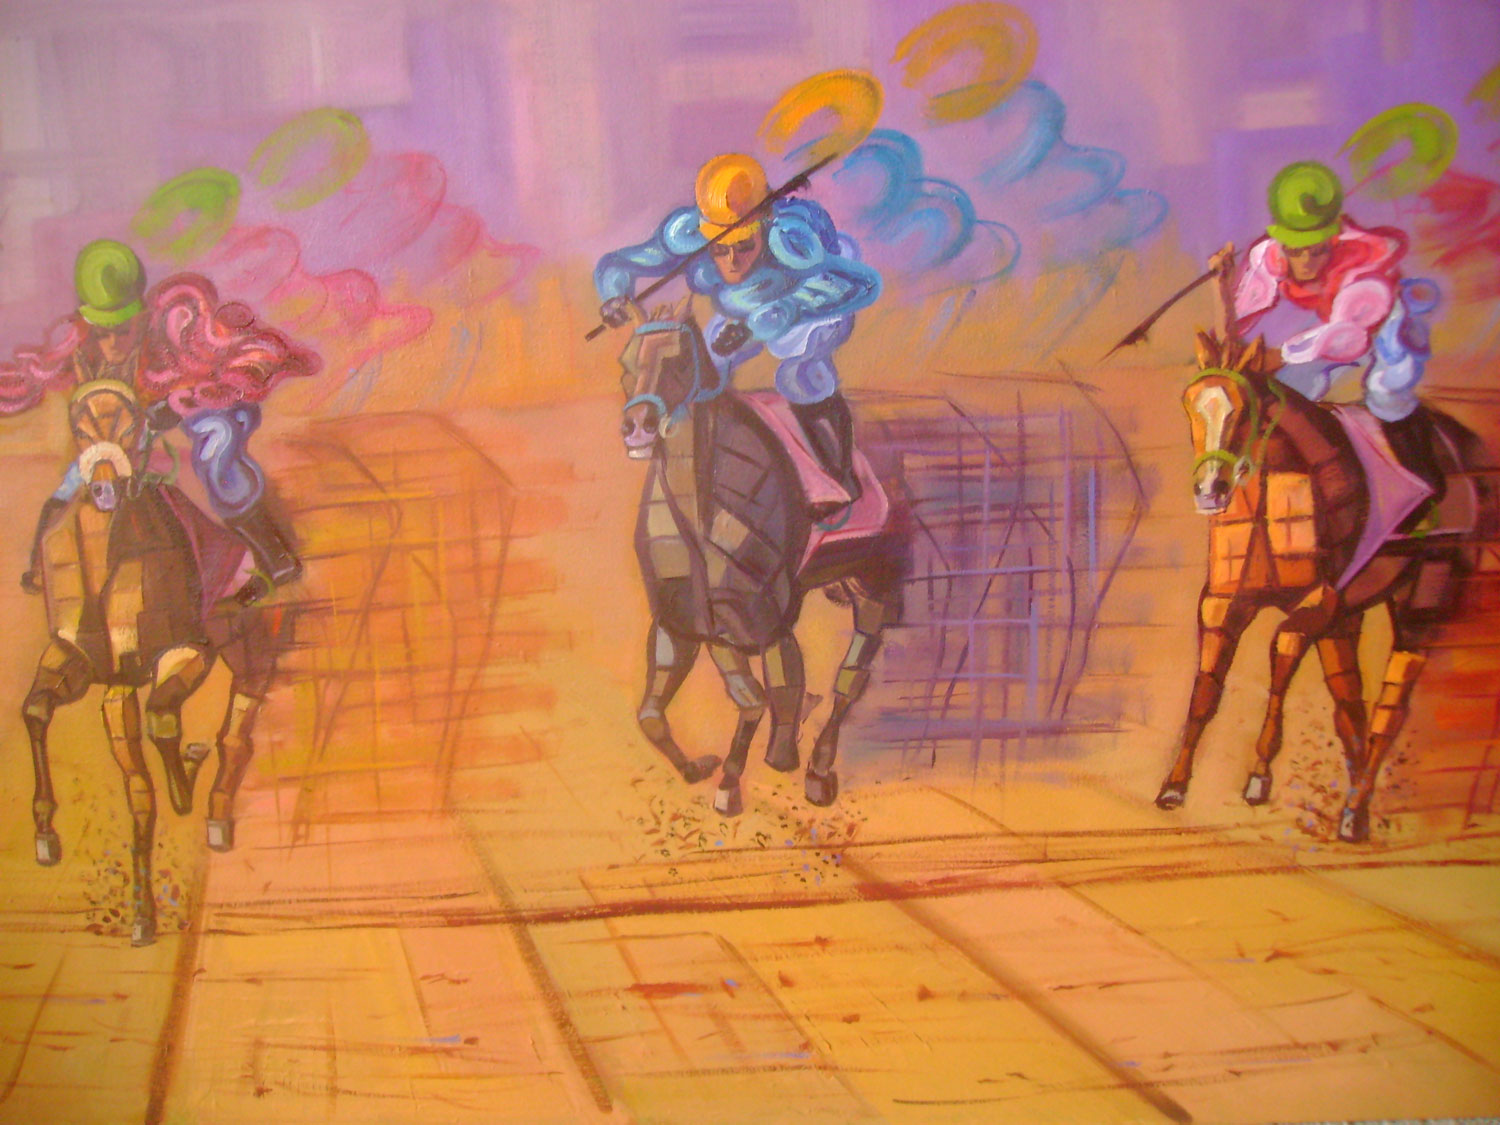 Horse race, Figurative art made in oil on canvas